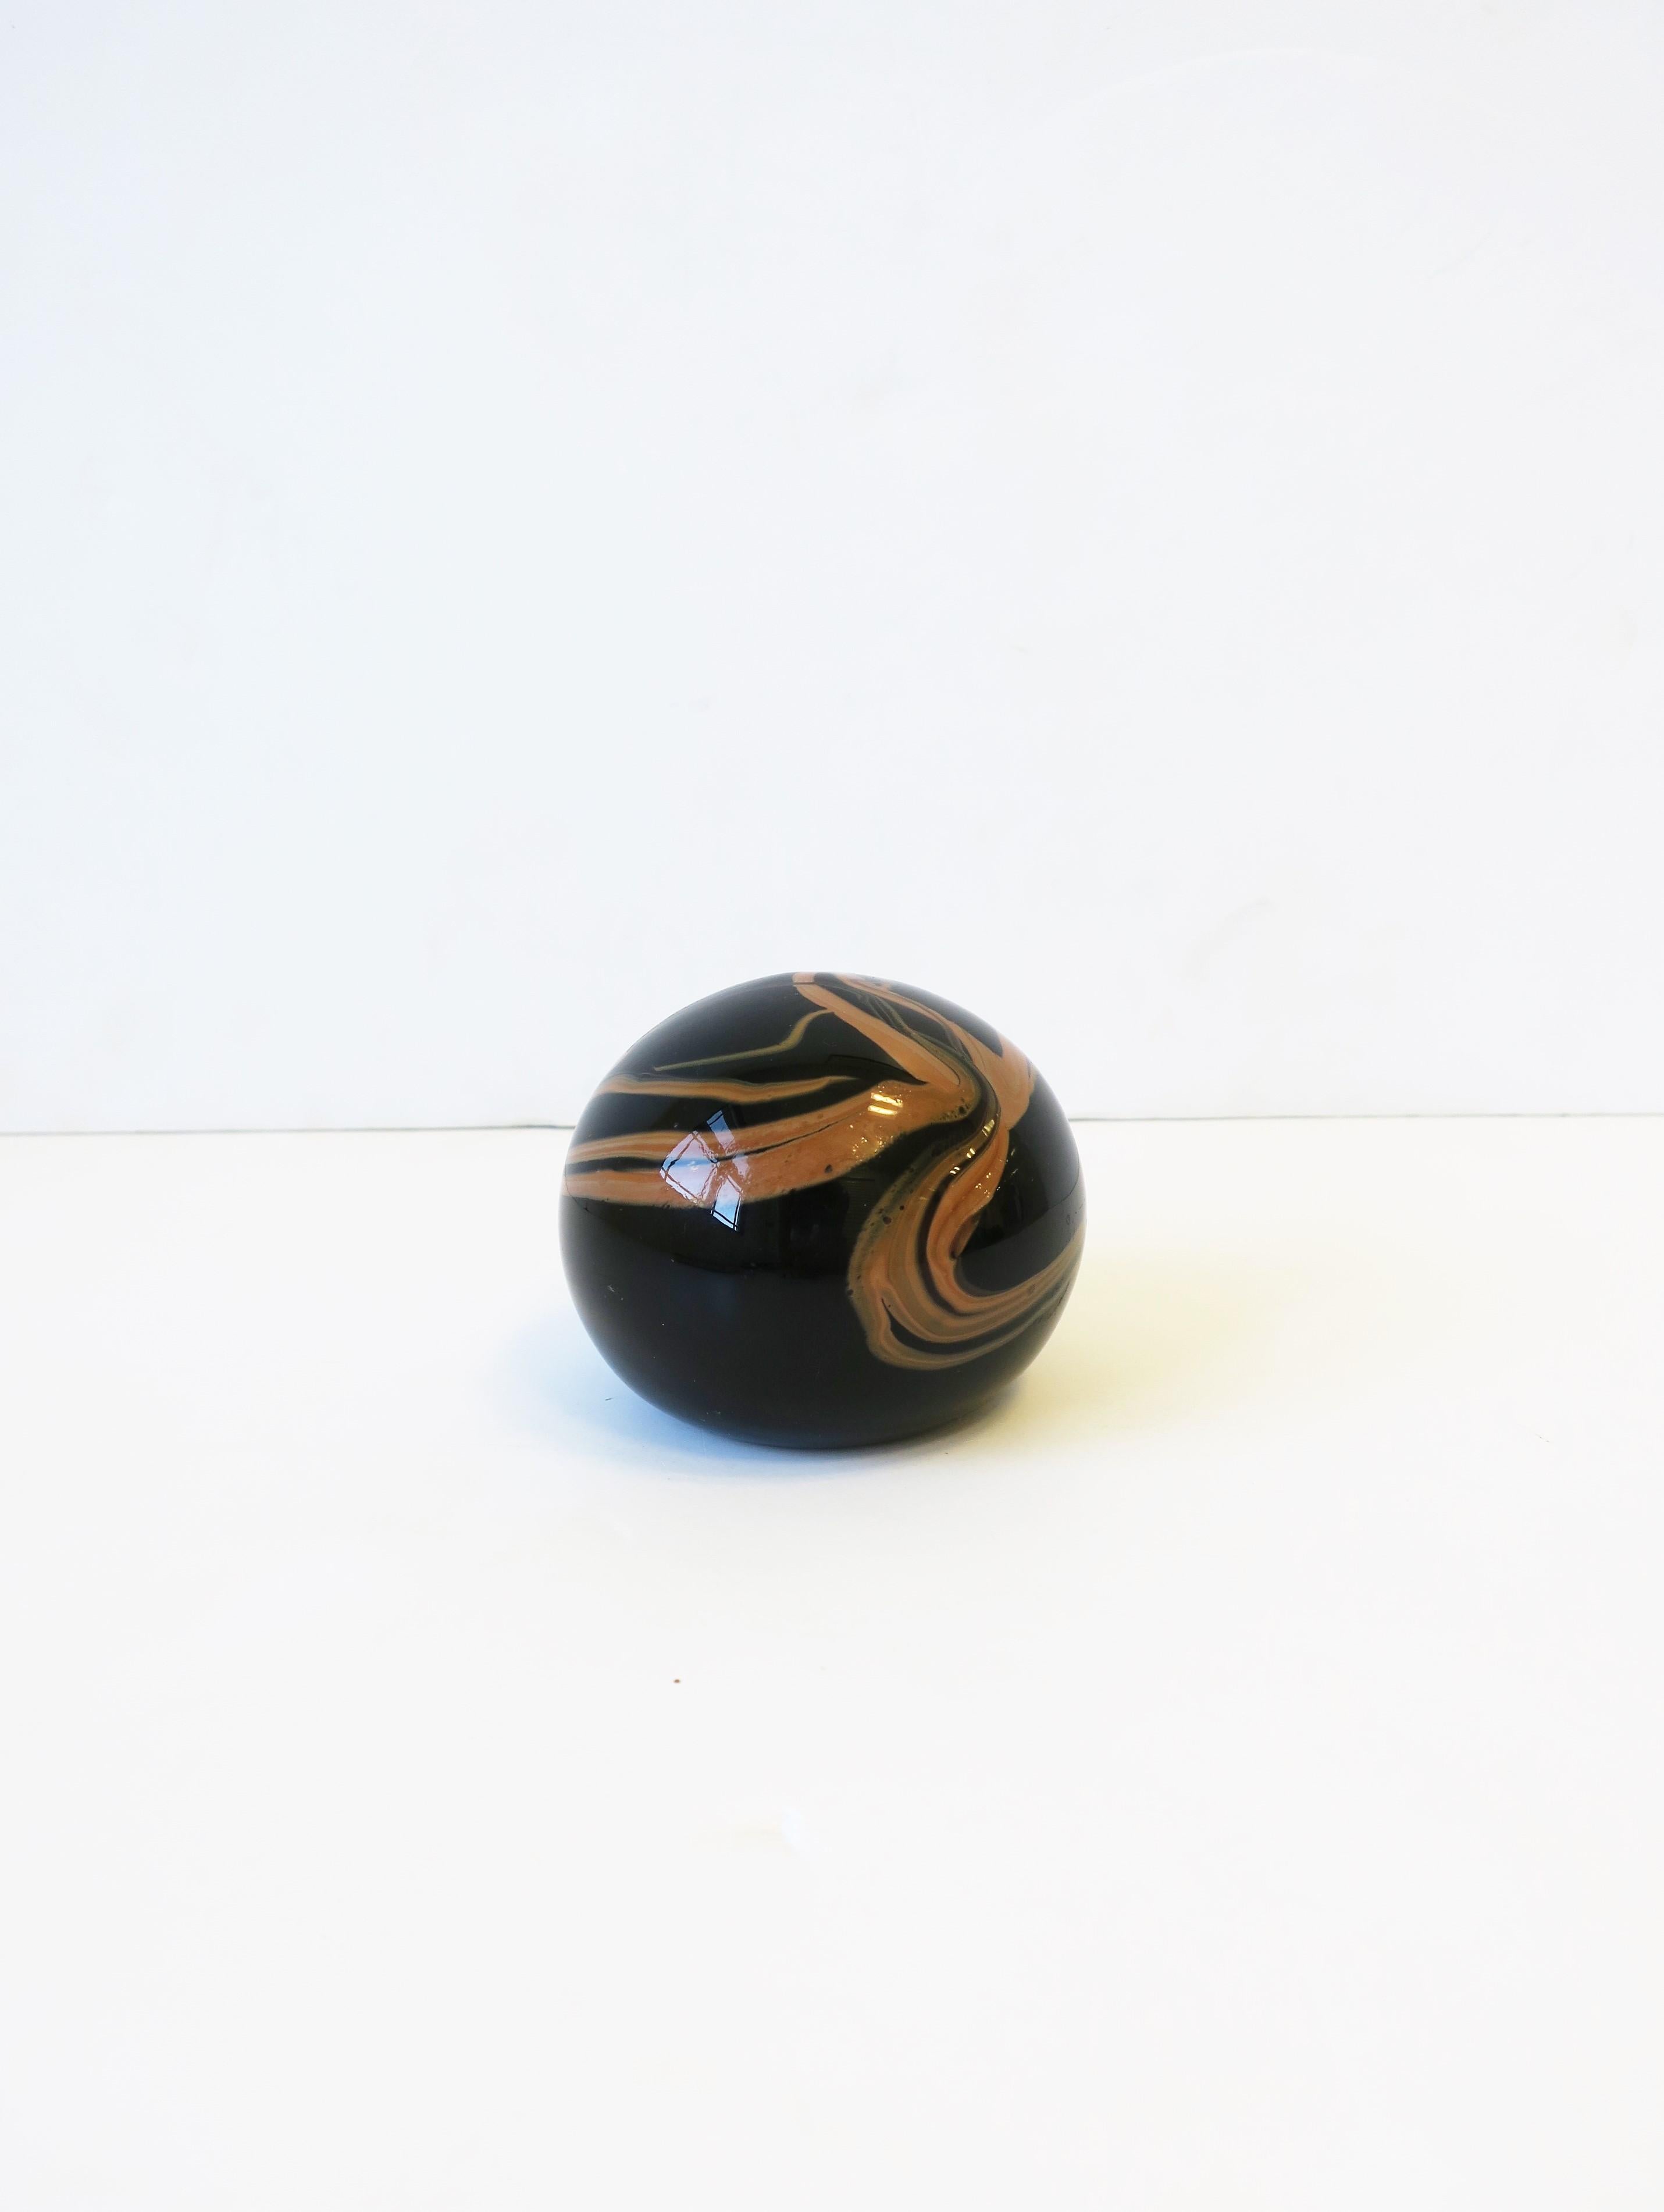 Blown Glass Modern Black Art Glass Paperweight or Decorative Object, circa 1970s For Sale